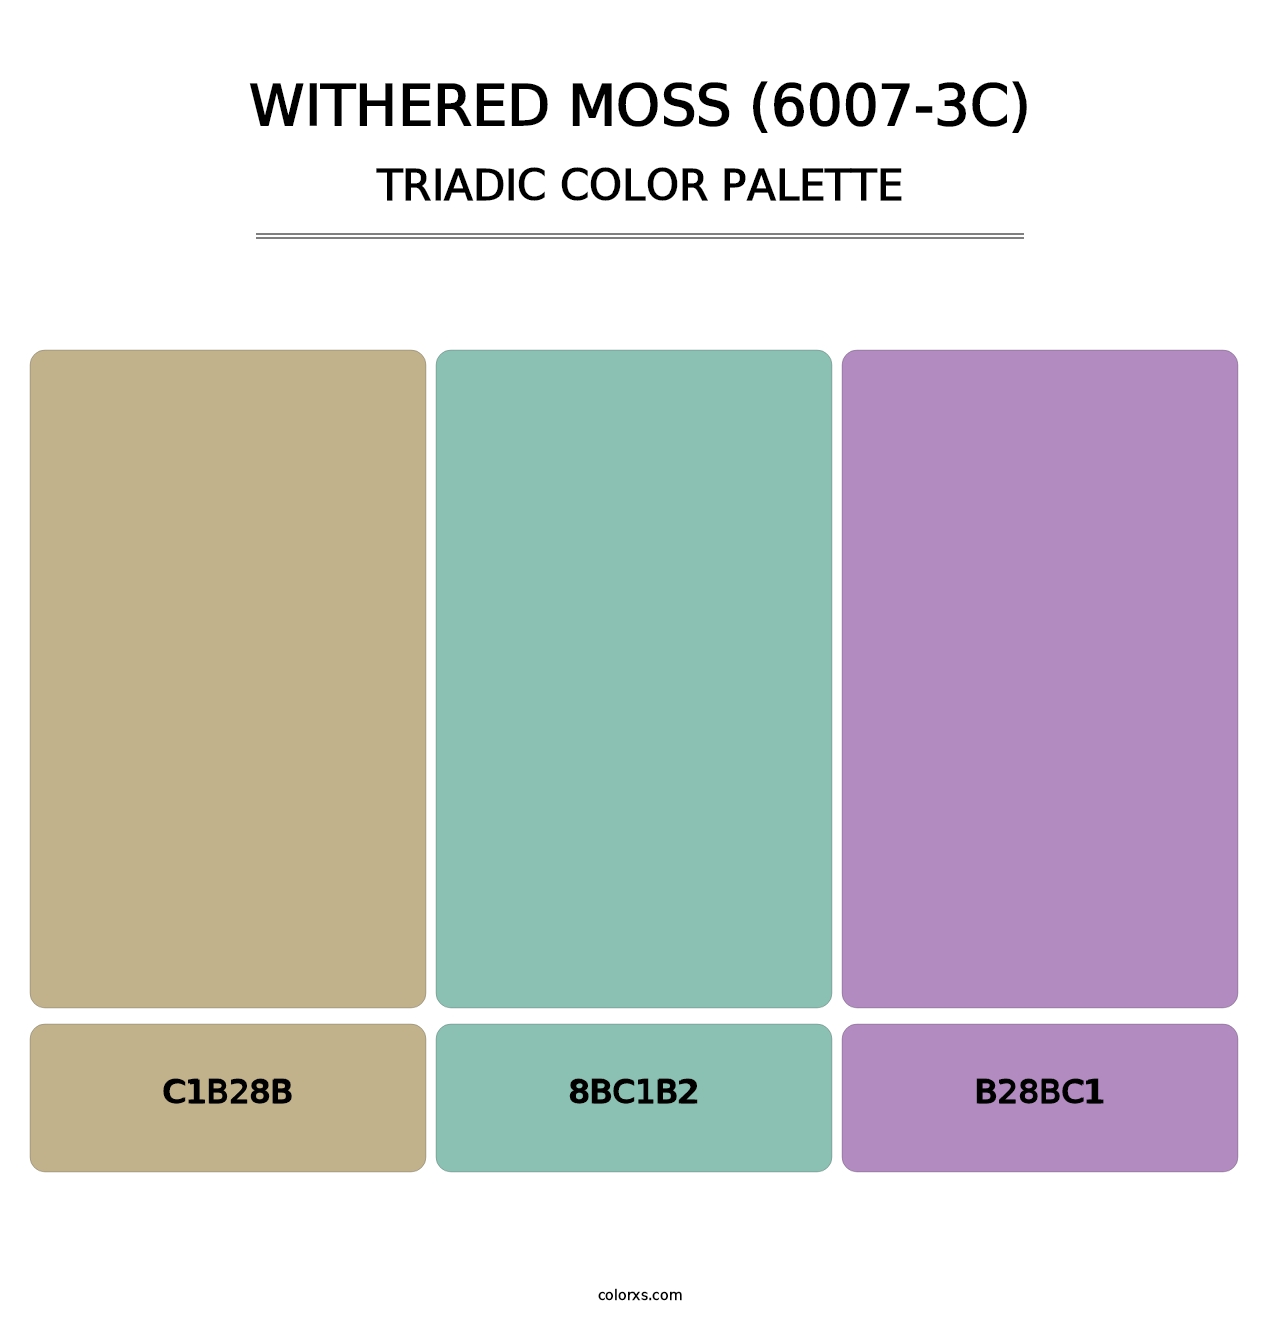 Withered Moss (6007-3C) - Triadic Color Palette